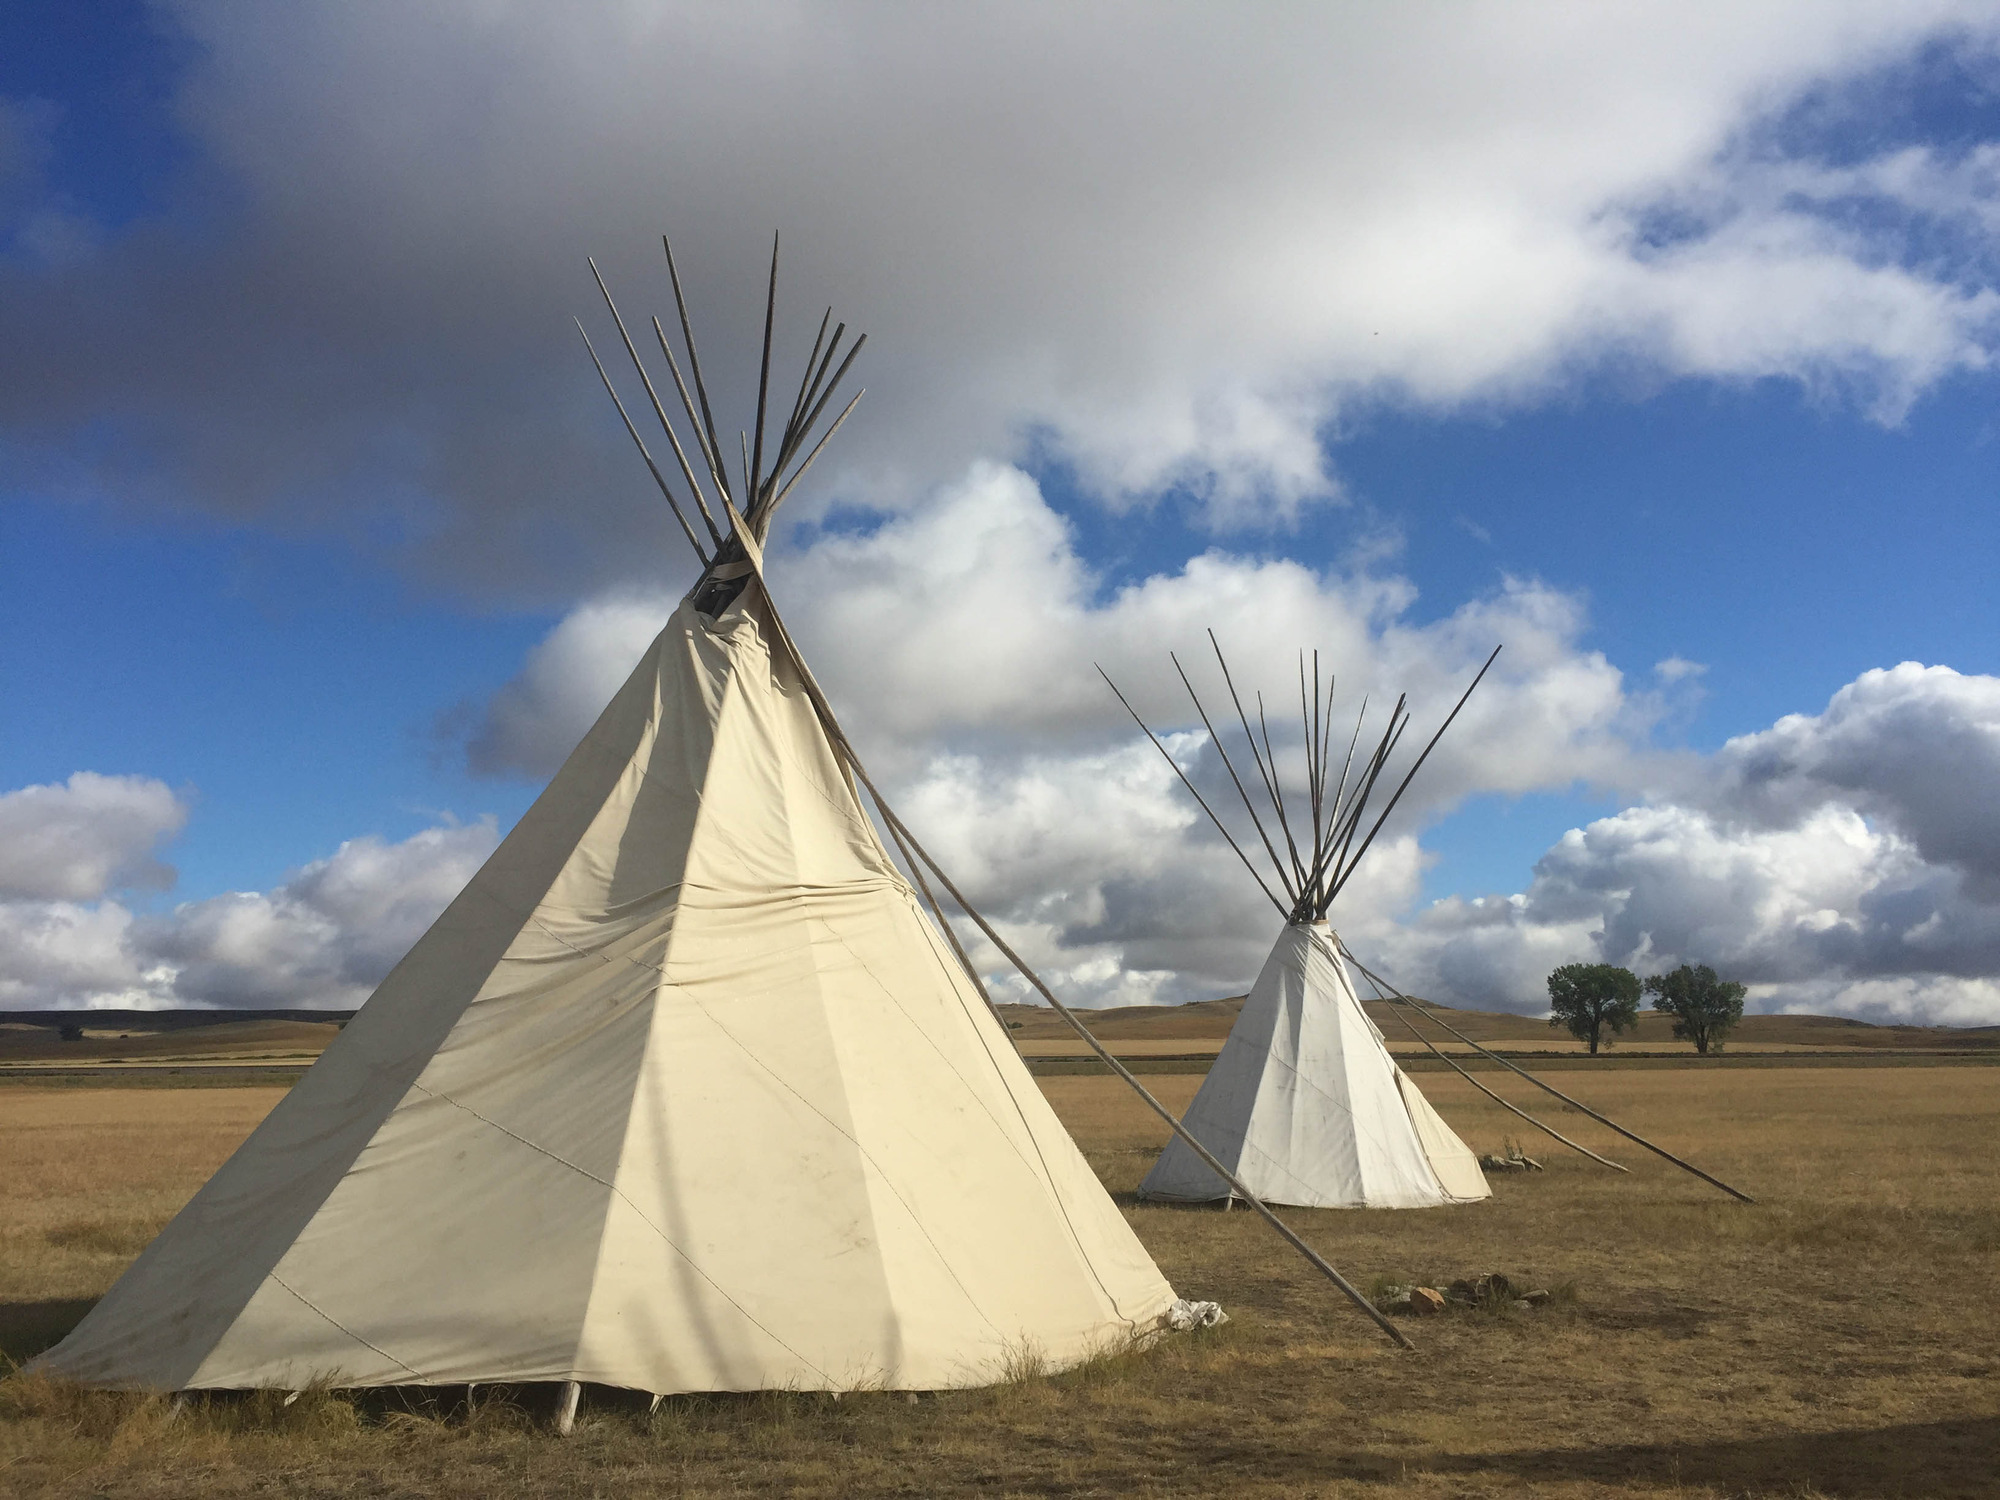 Two tipis in a field